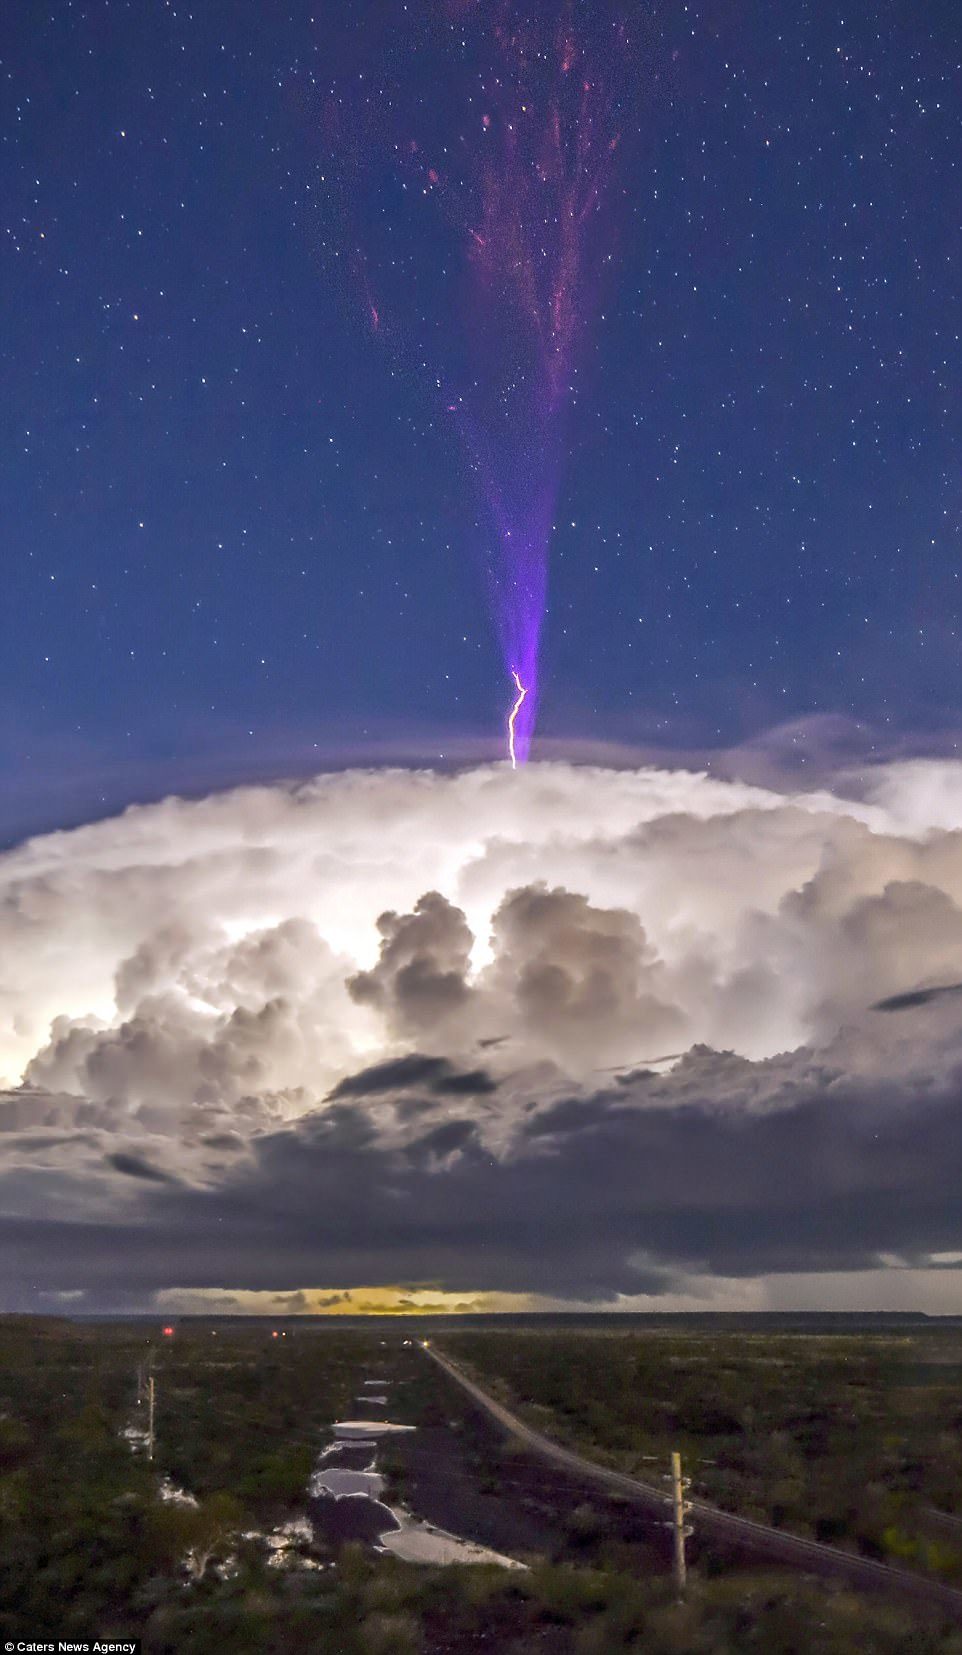 Upper atmospheric lightning, or ionospheric lightning, are terms used by experts to refer to a family of short-lived electrical-breakdown phenomena that occur above the altitudes of normal lightning and storm clouds. 